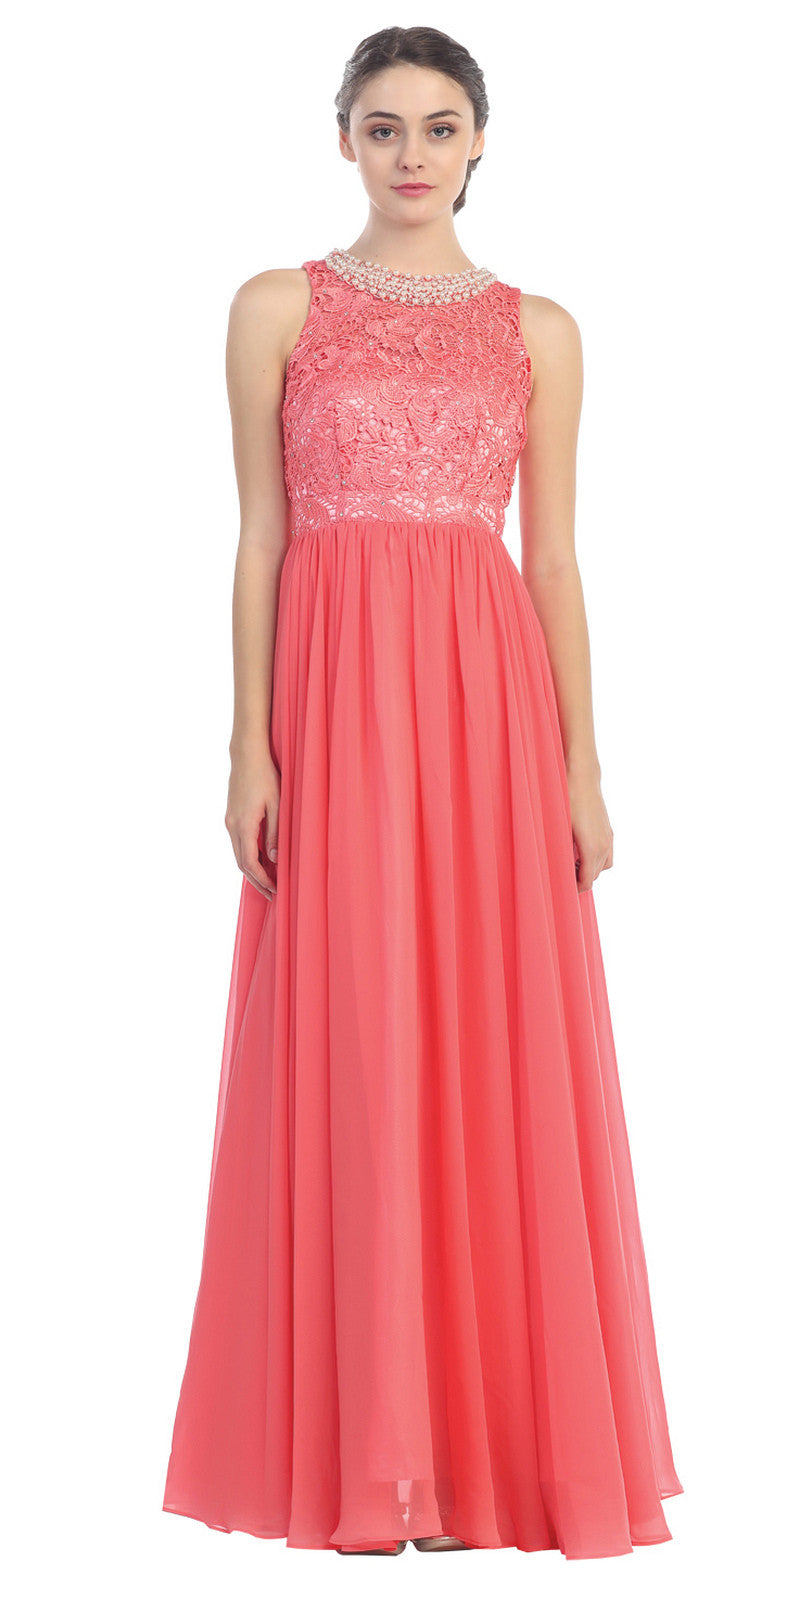 Empire Waist Chiffon Evening Gown Coral A Line Full Length